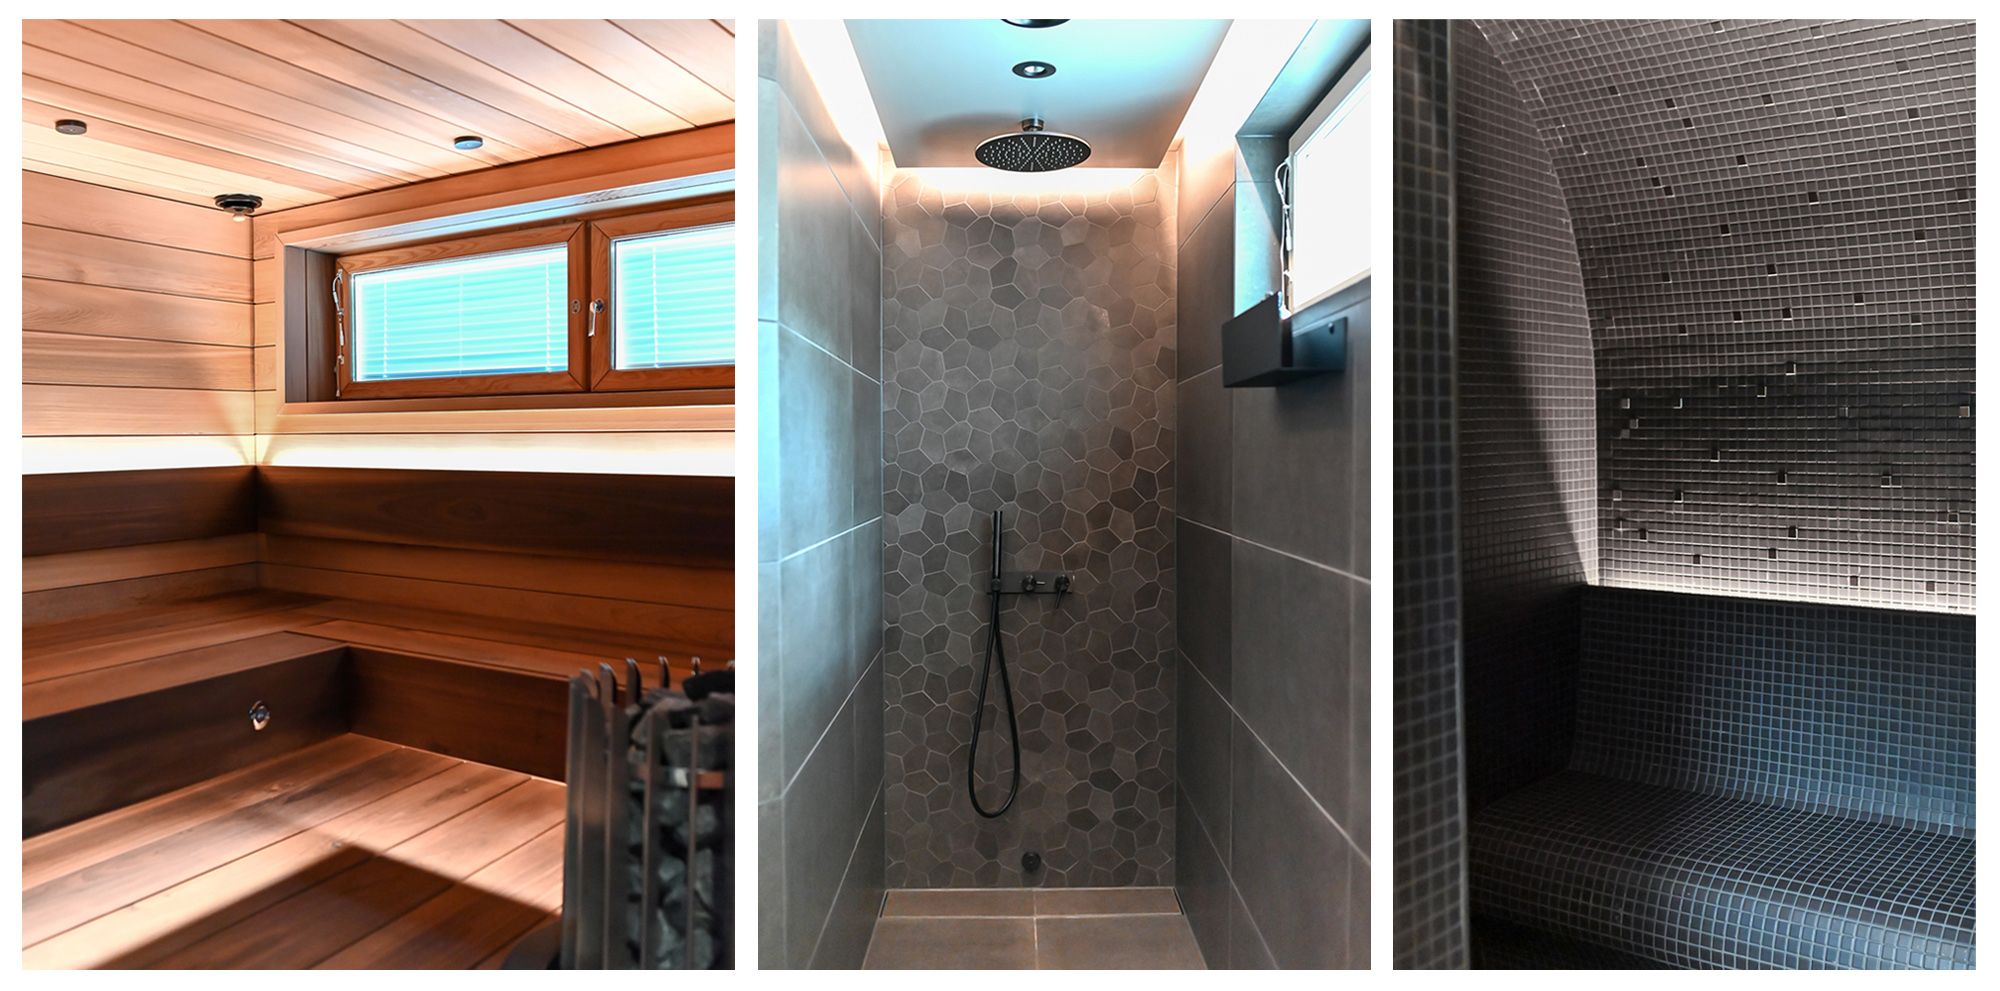 A complete renovation of the shower and sauna areas, with tapes to create a new atmosphere. Photos.